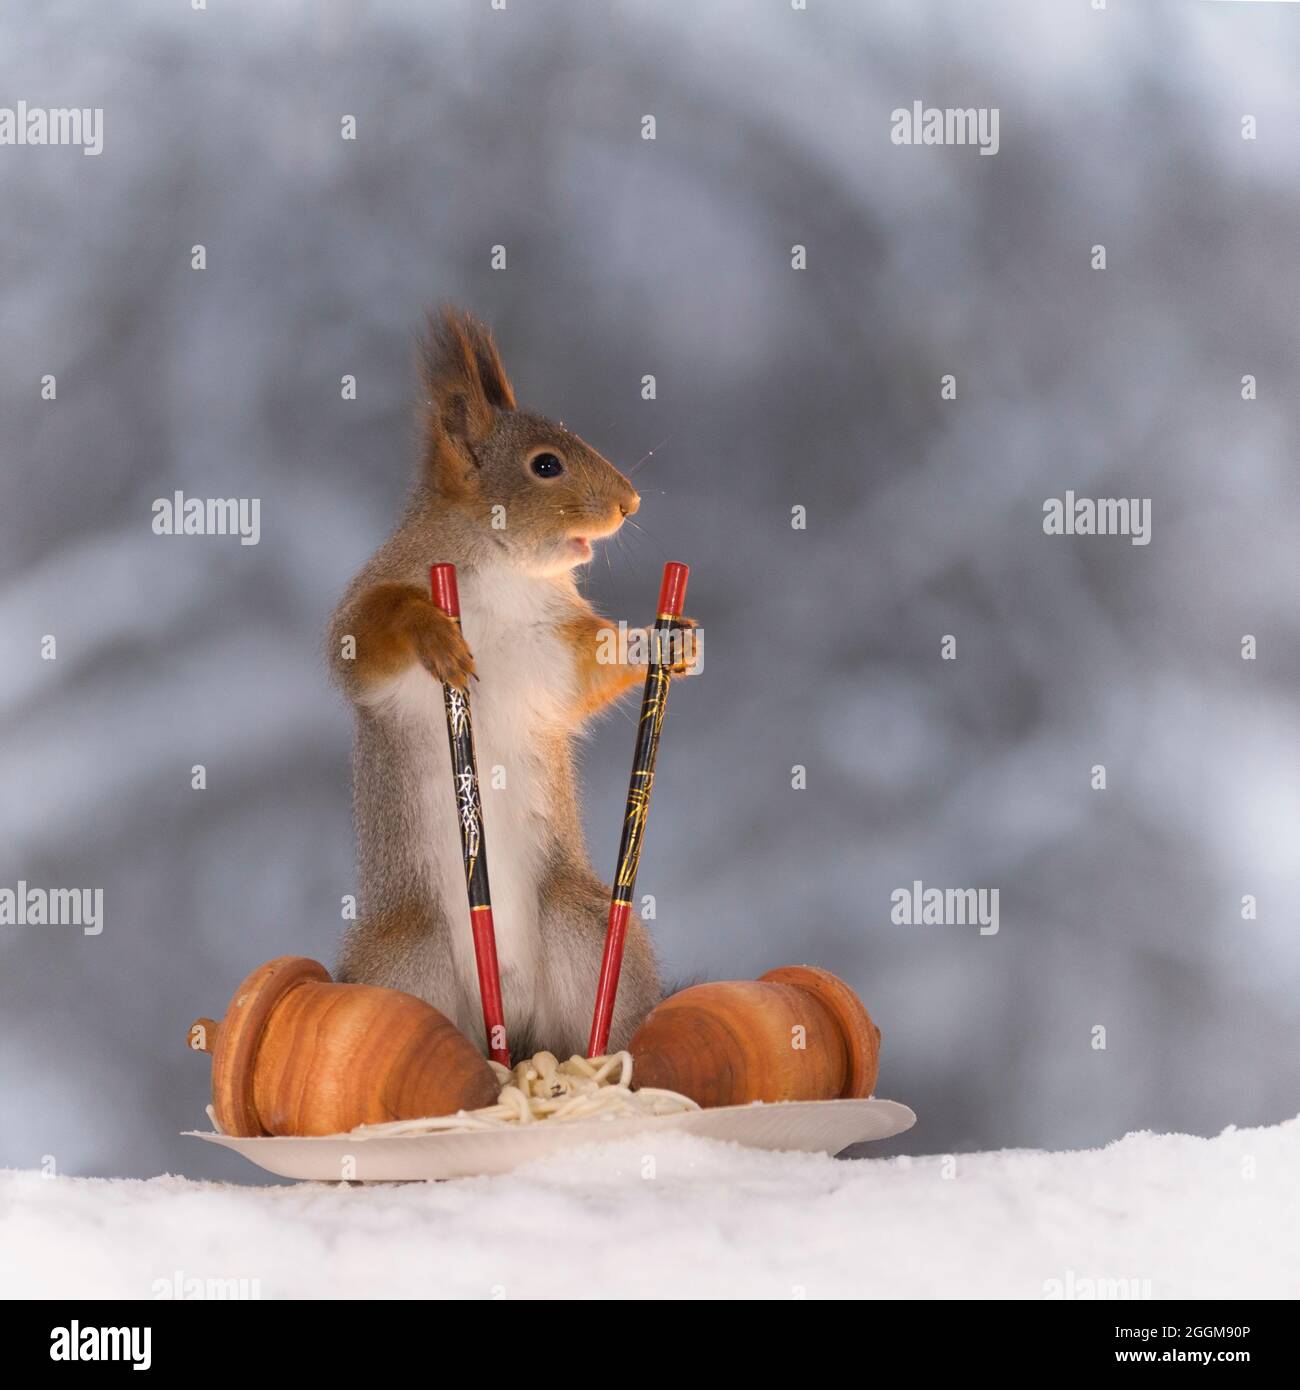 red squirrel hold two Chopsticks on noodles and acorn plate Stock Photo